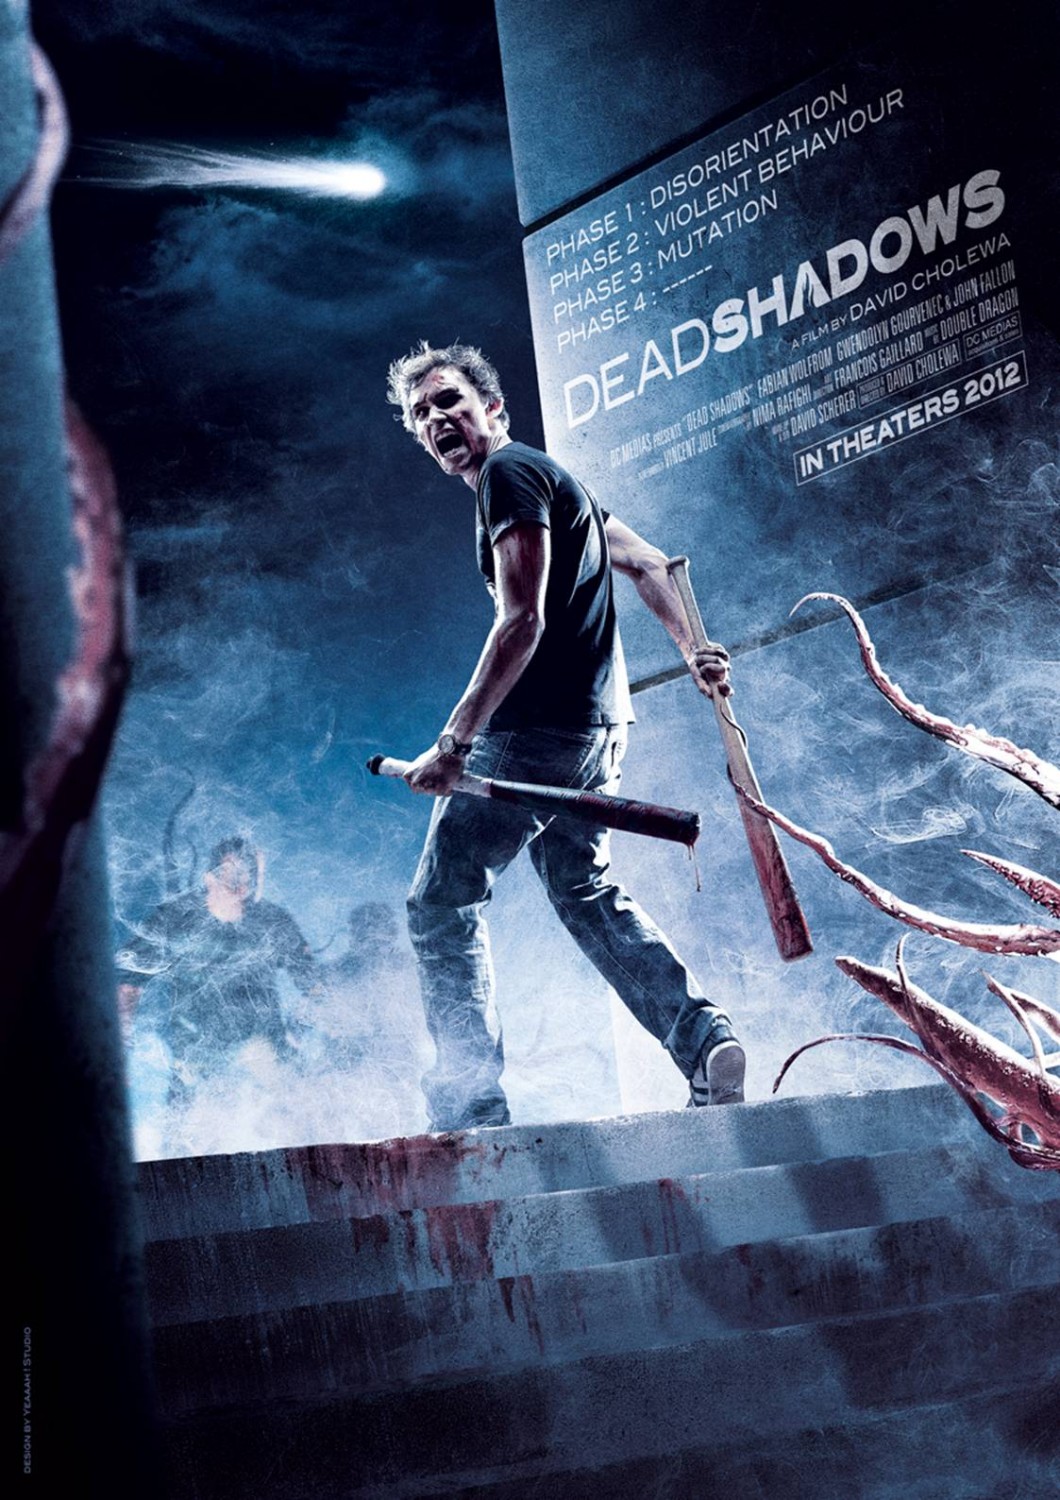 Extra Large Movie Poster Image for Dead Shadows 